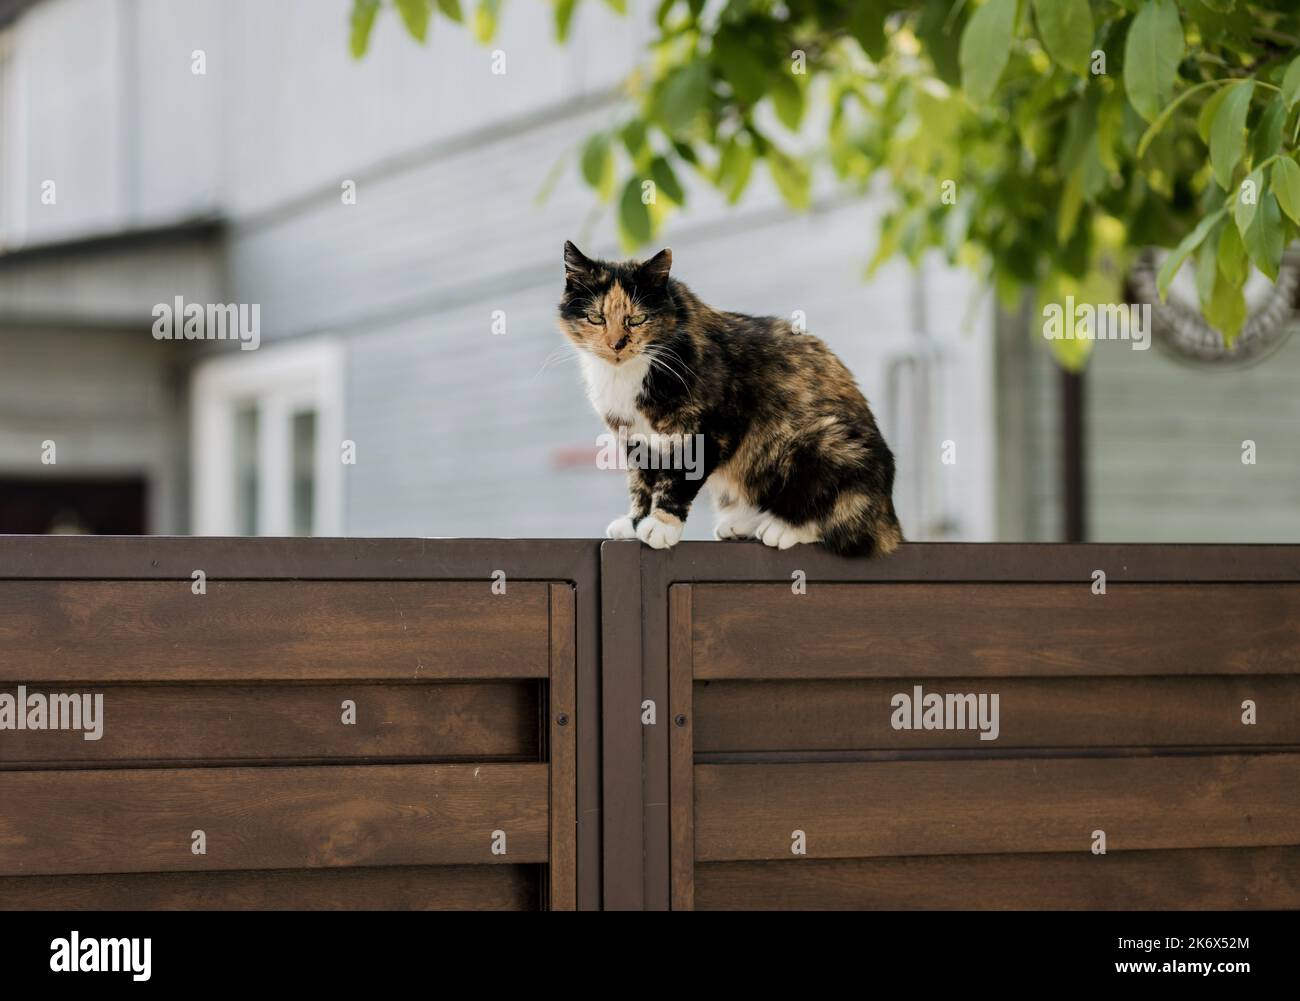 Cute fluffy cat sitting on old wooden fence Stock Photo